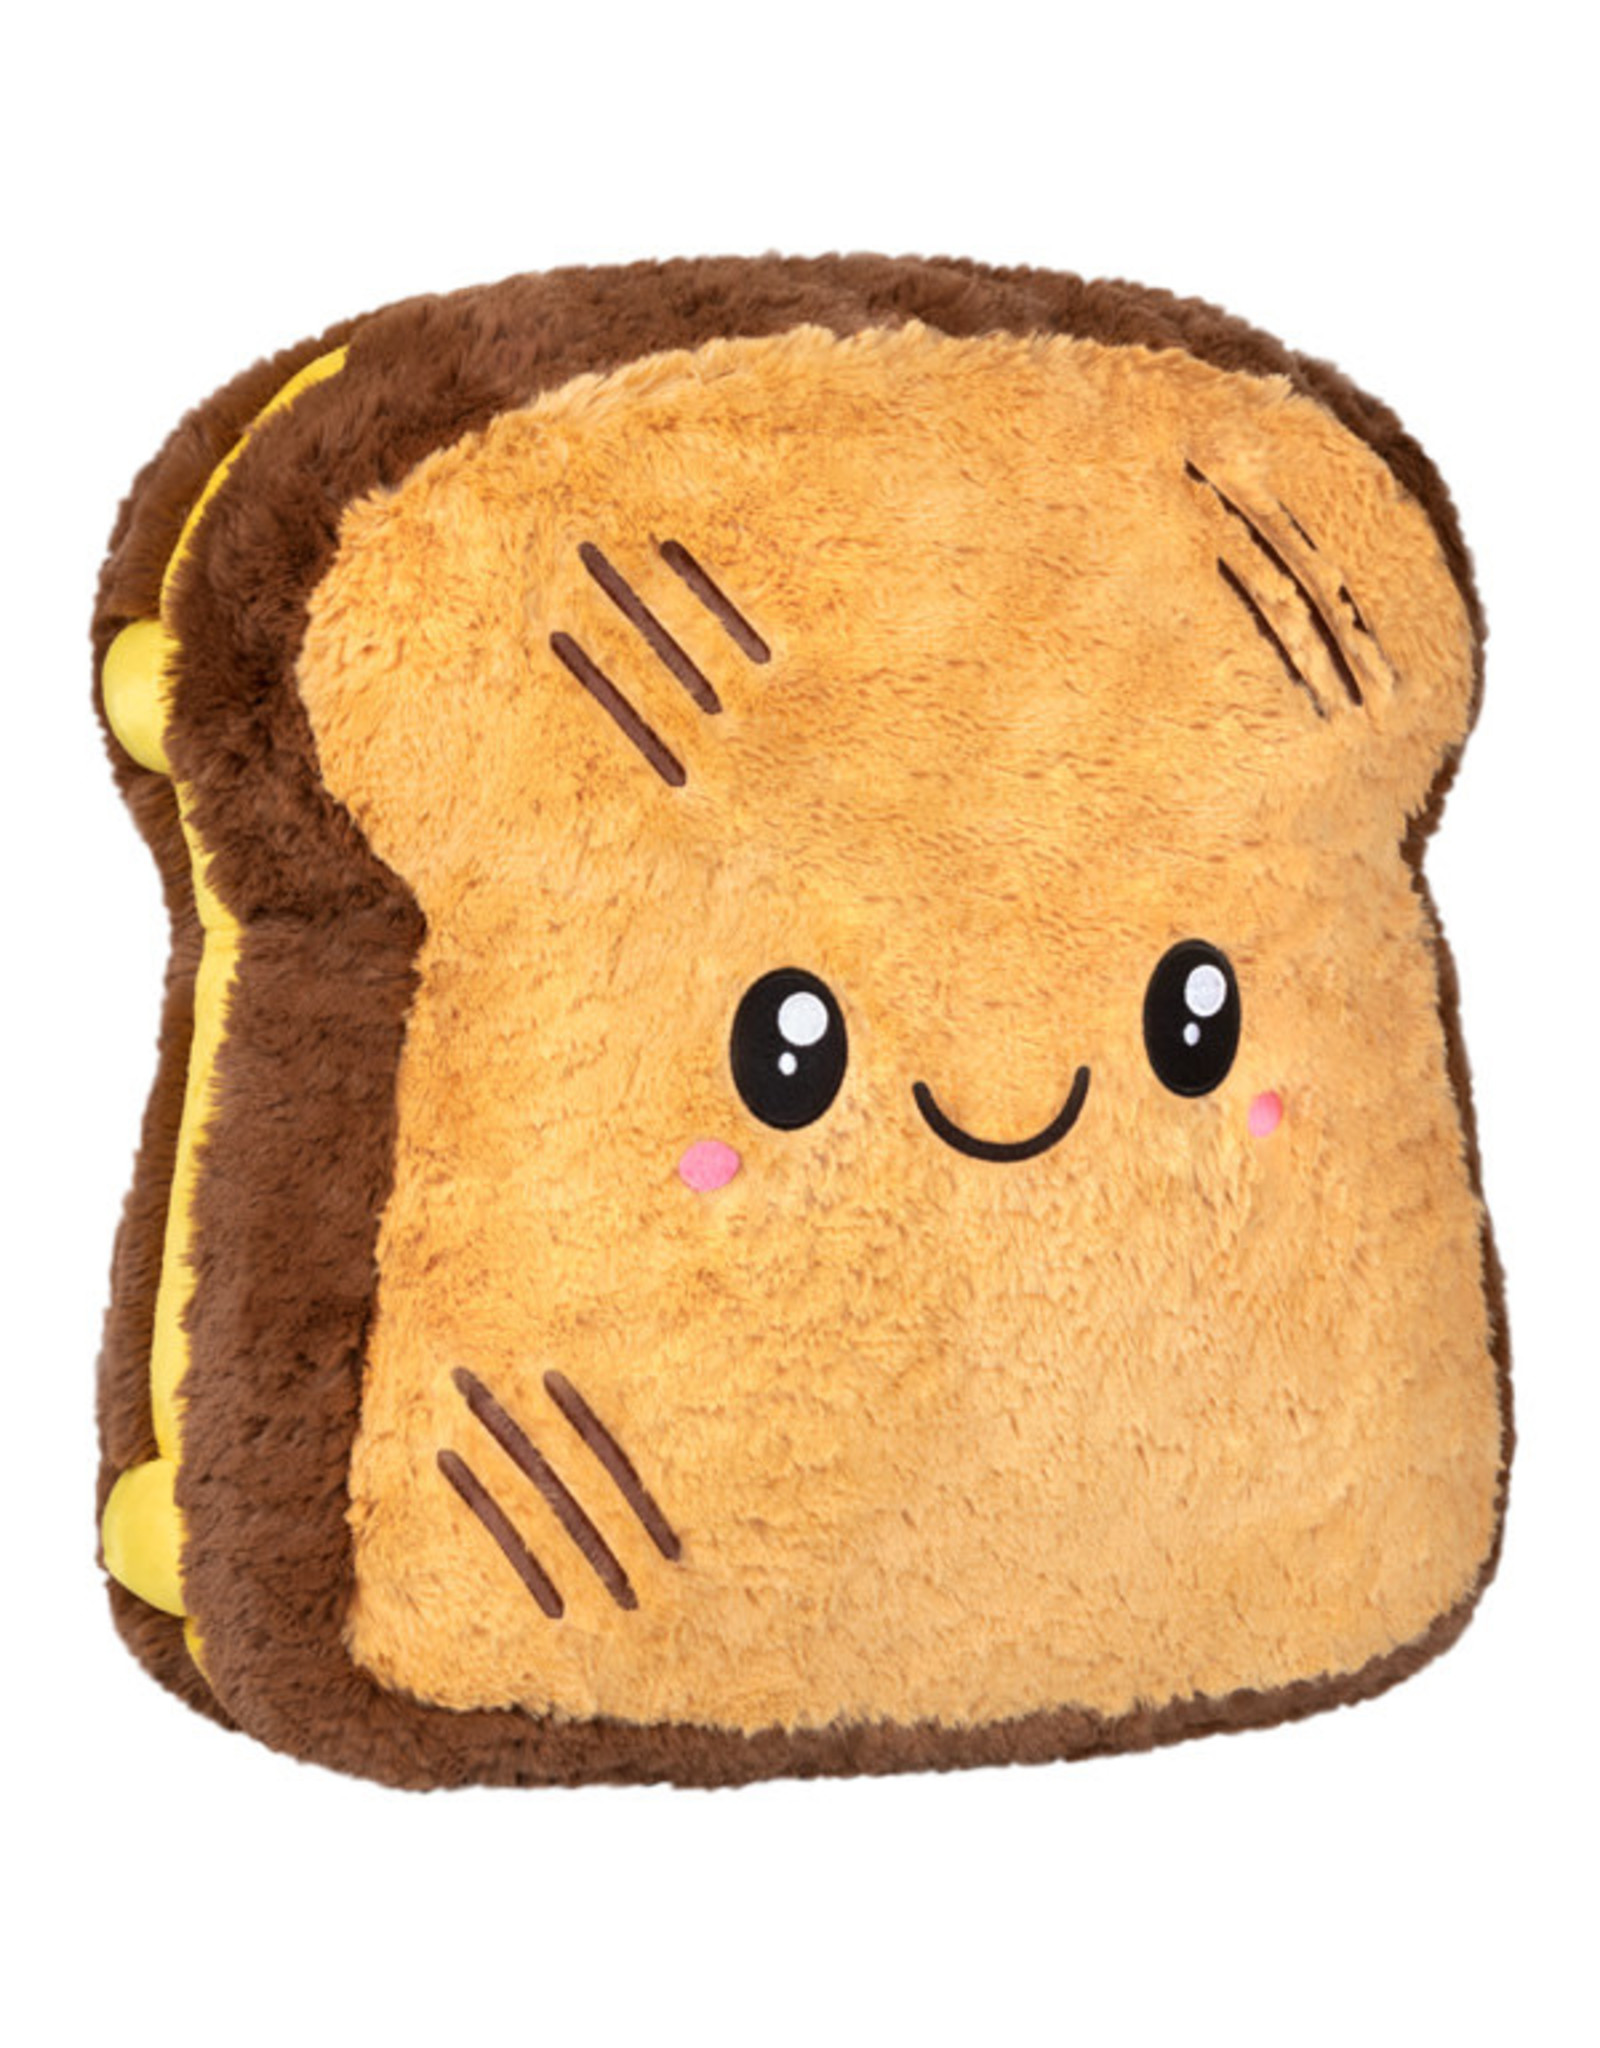 Gourmet Grilled Cheese Squishable